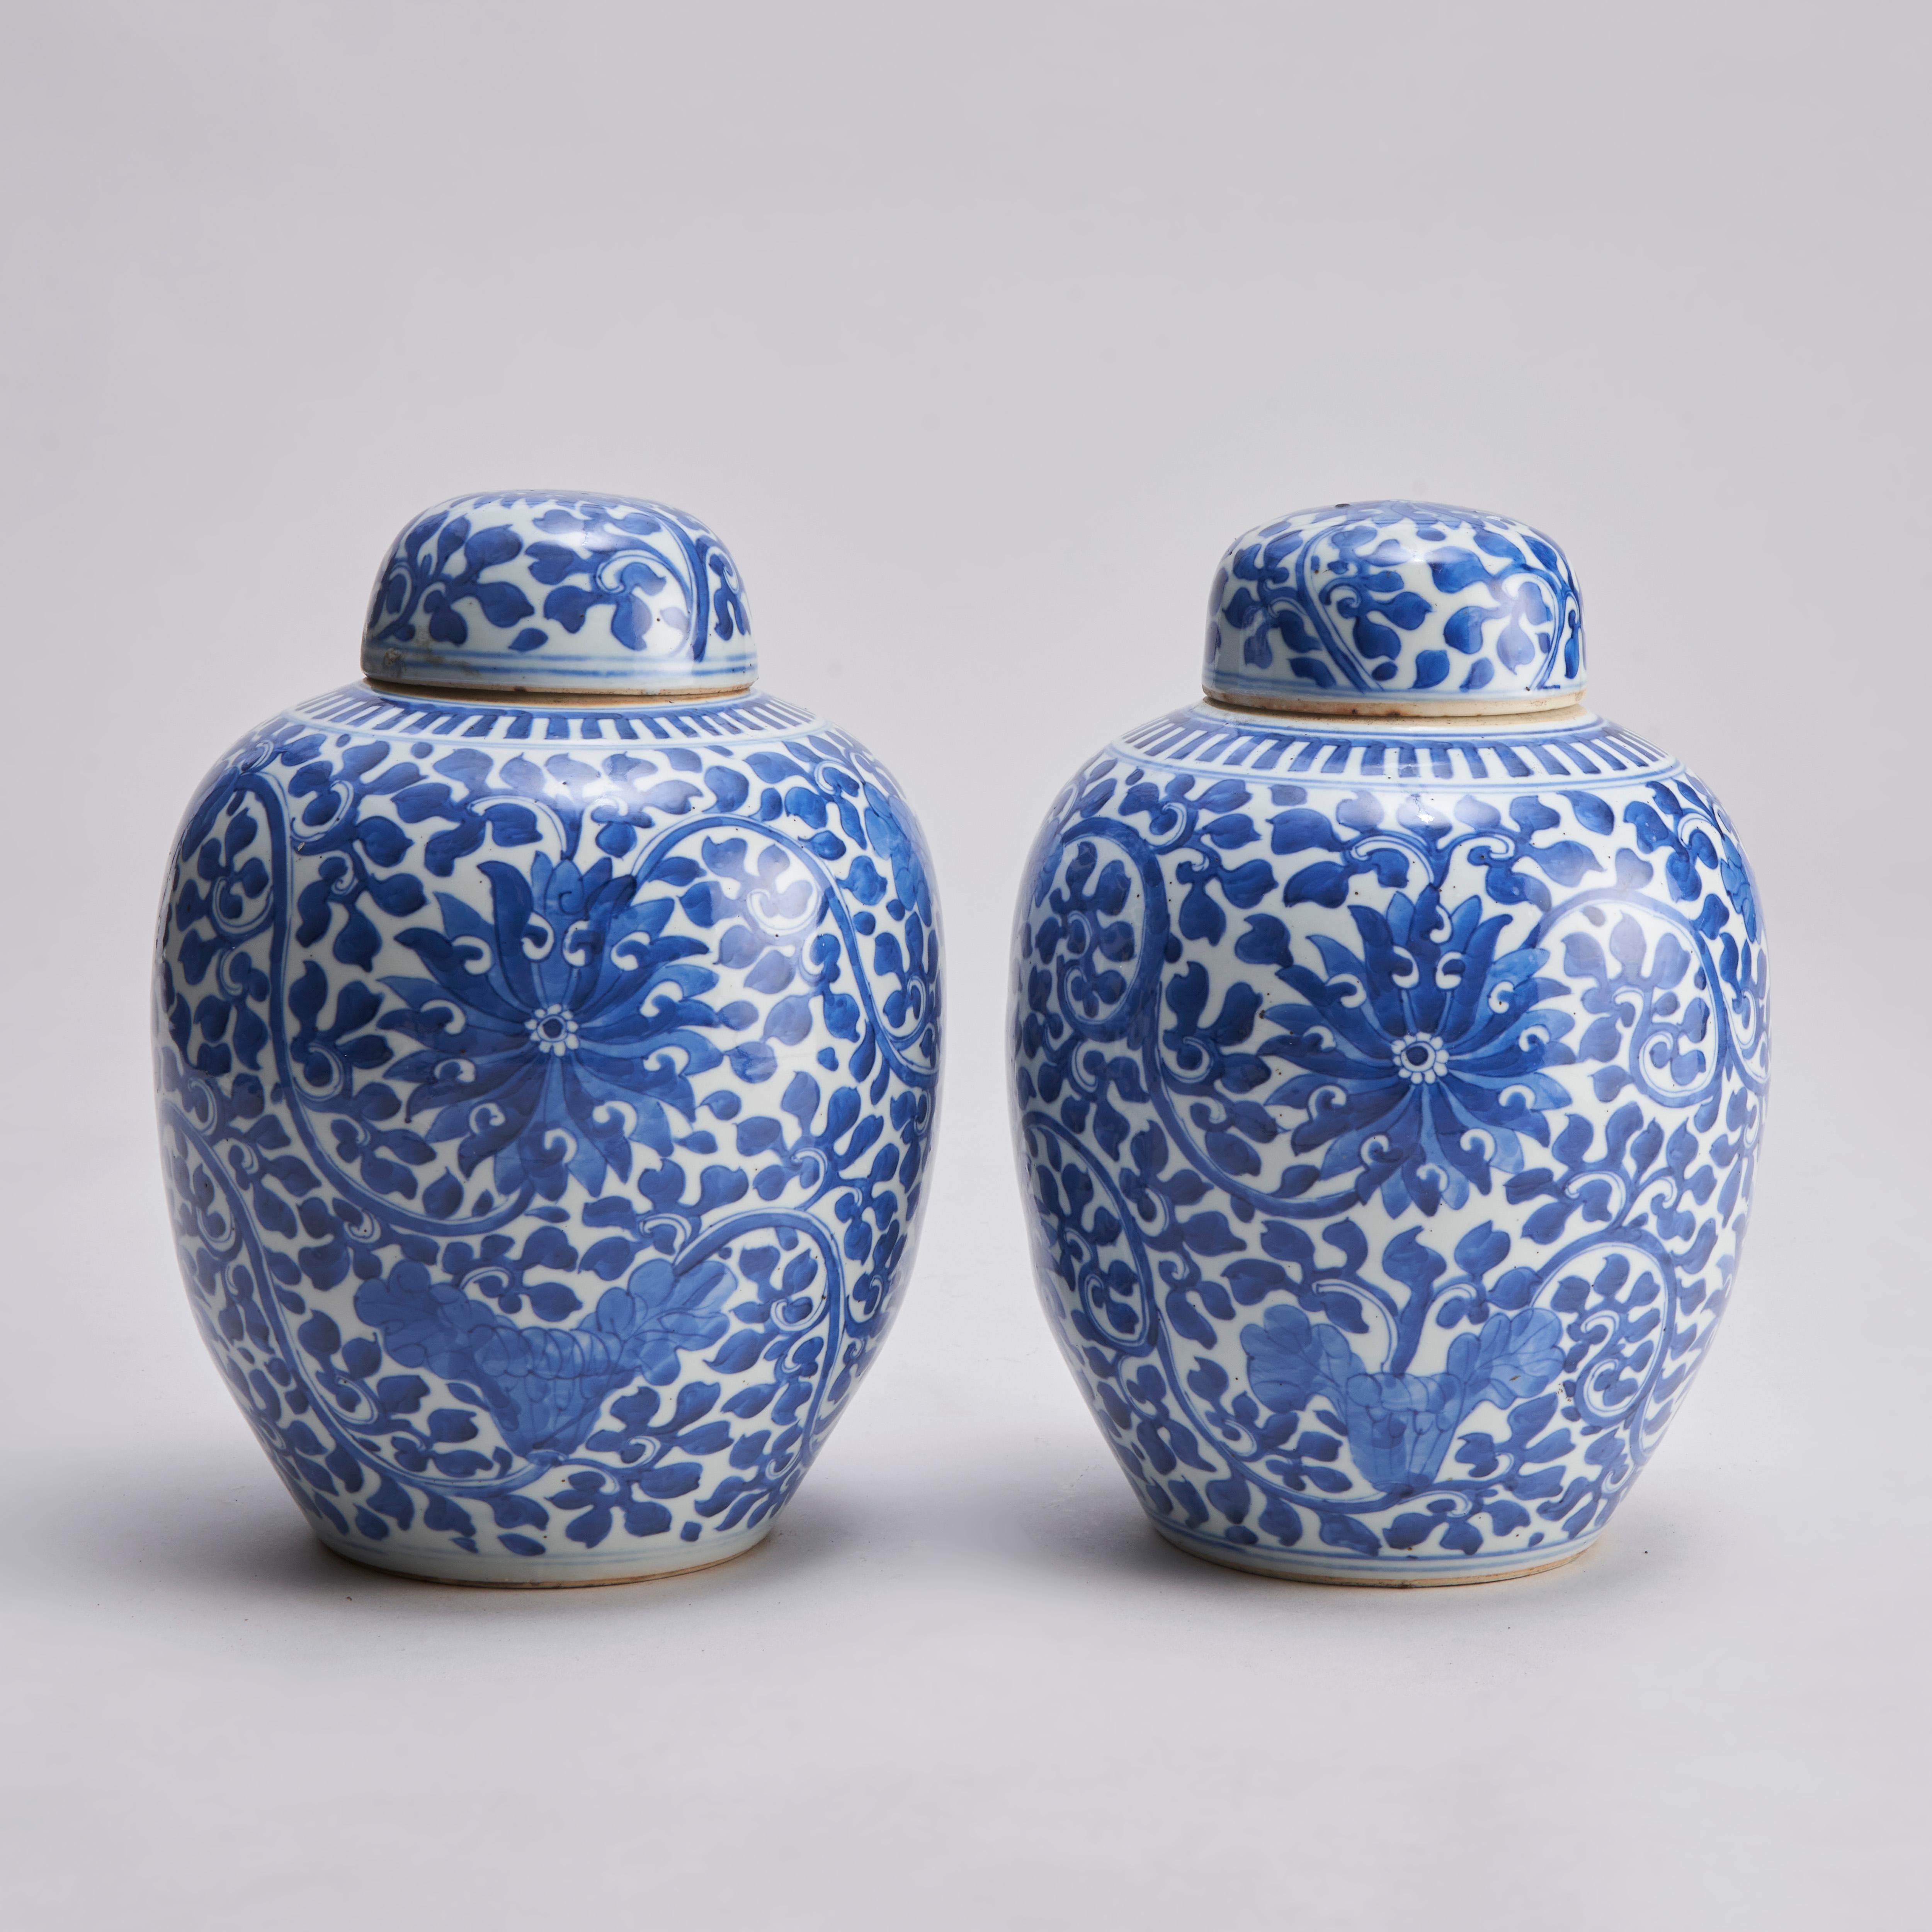 An elegant pair of 19th century Chinese blue and white ginger jars and covers. Decorated with an floral design depicting a climbing Clematus plant in bloom.

Contact us for further information or to arrange a viewing.